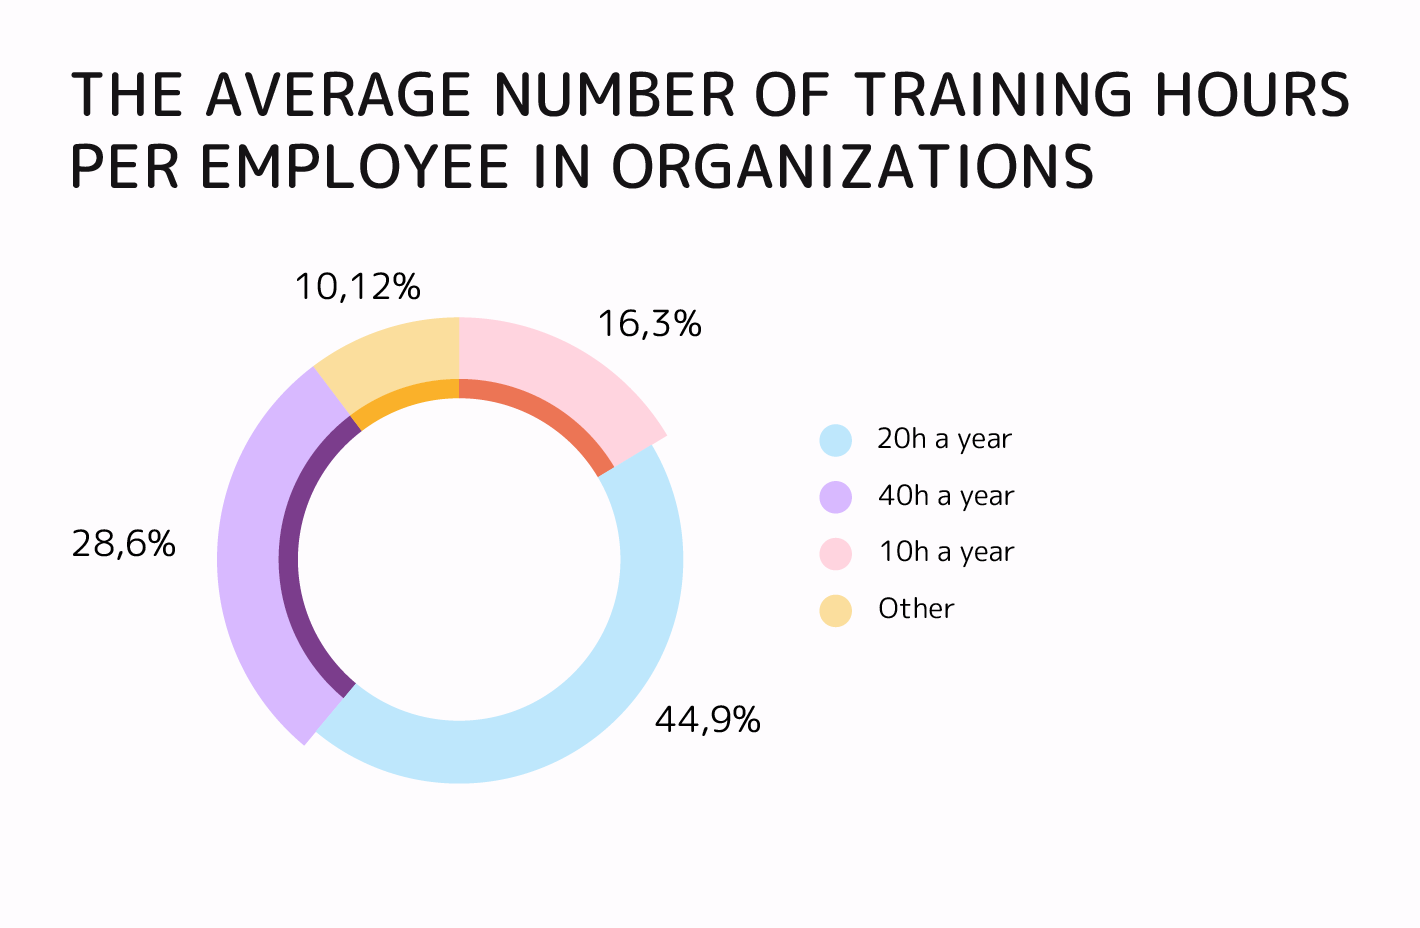 Corporate Learning and Development 2020 in Numbers | Raccoongang.com